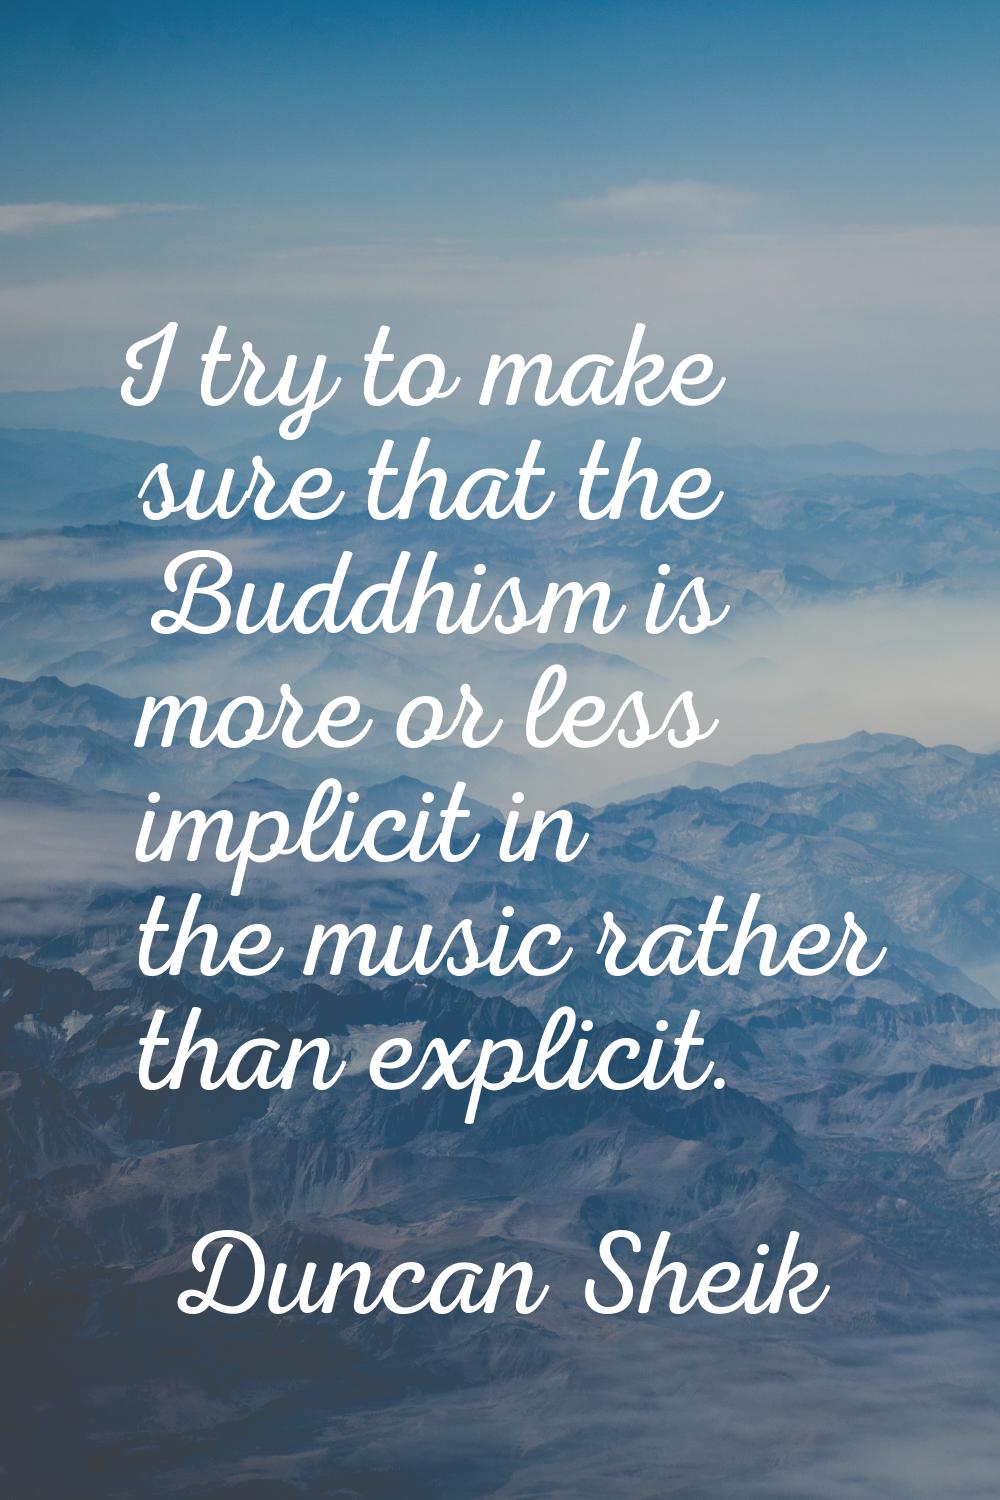 I try to make sure that the Buddhism is more or less implicit in the music rather than explicit.